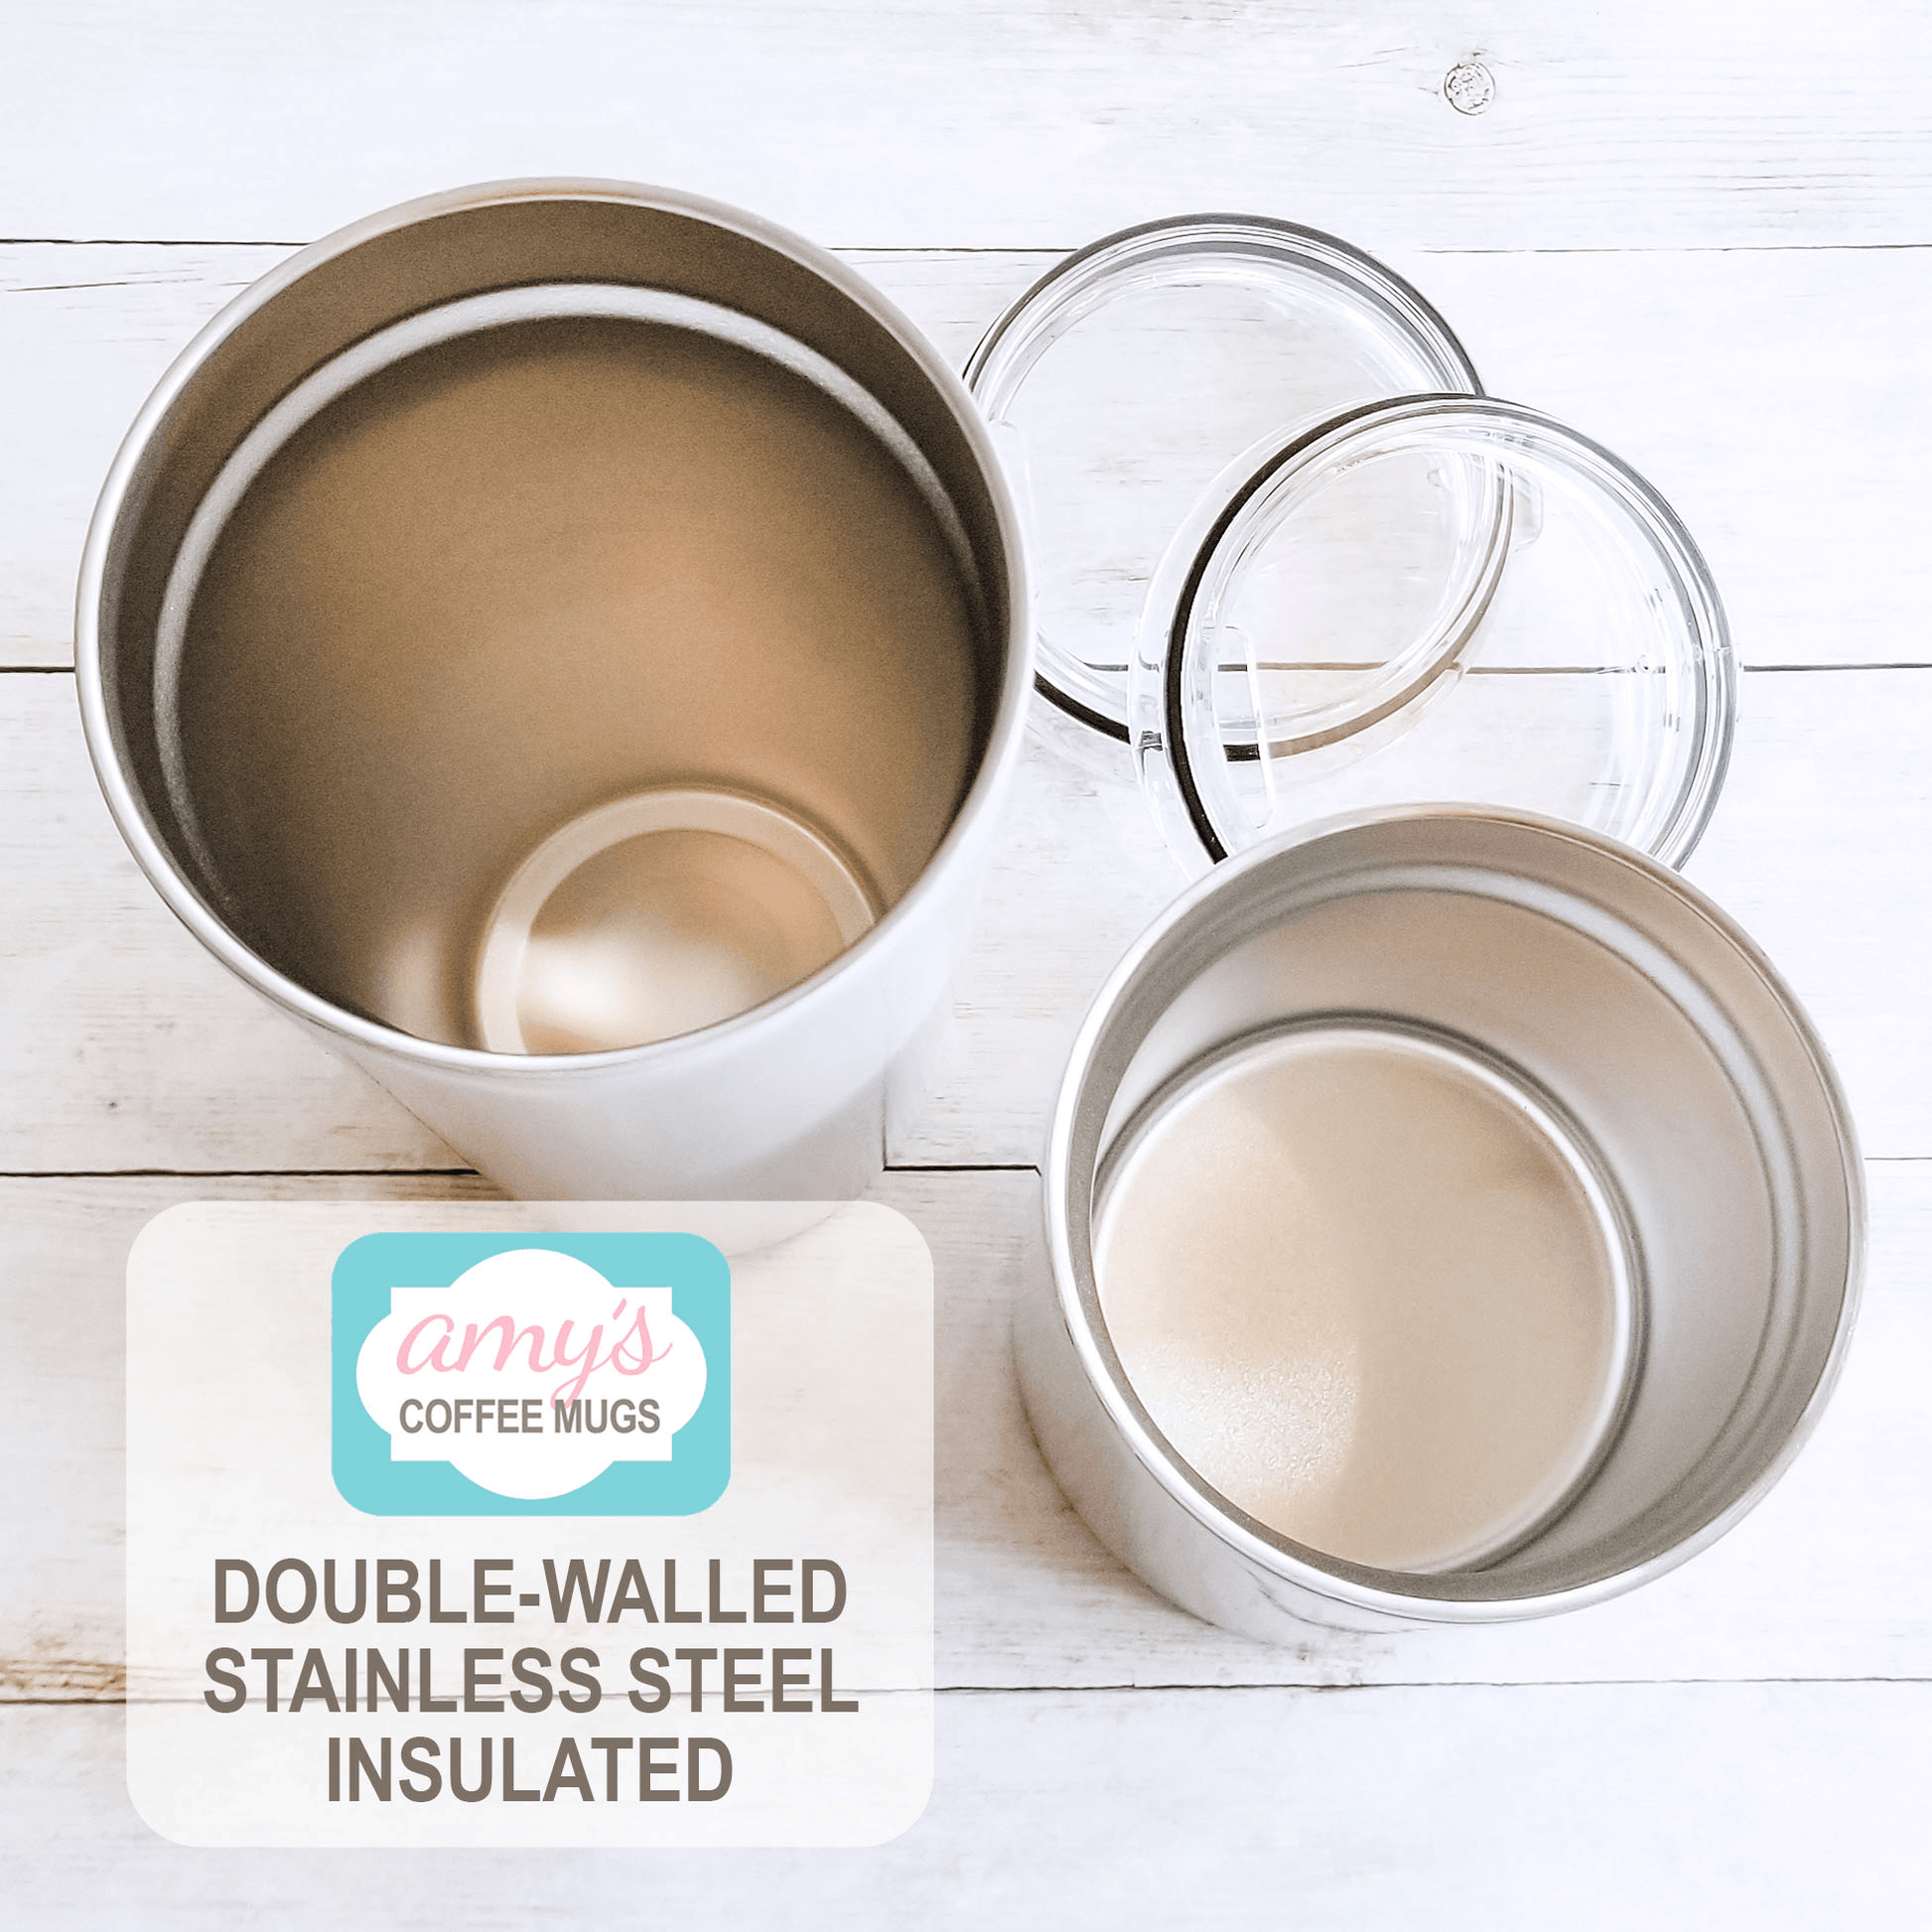 double-walled stainless steel inside - Amy's Coffee Mugs